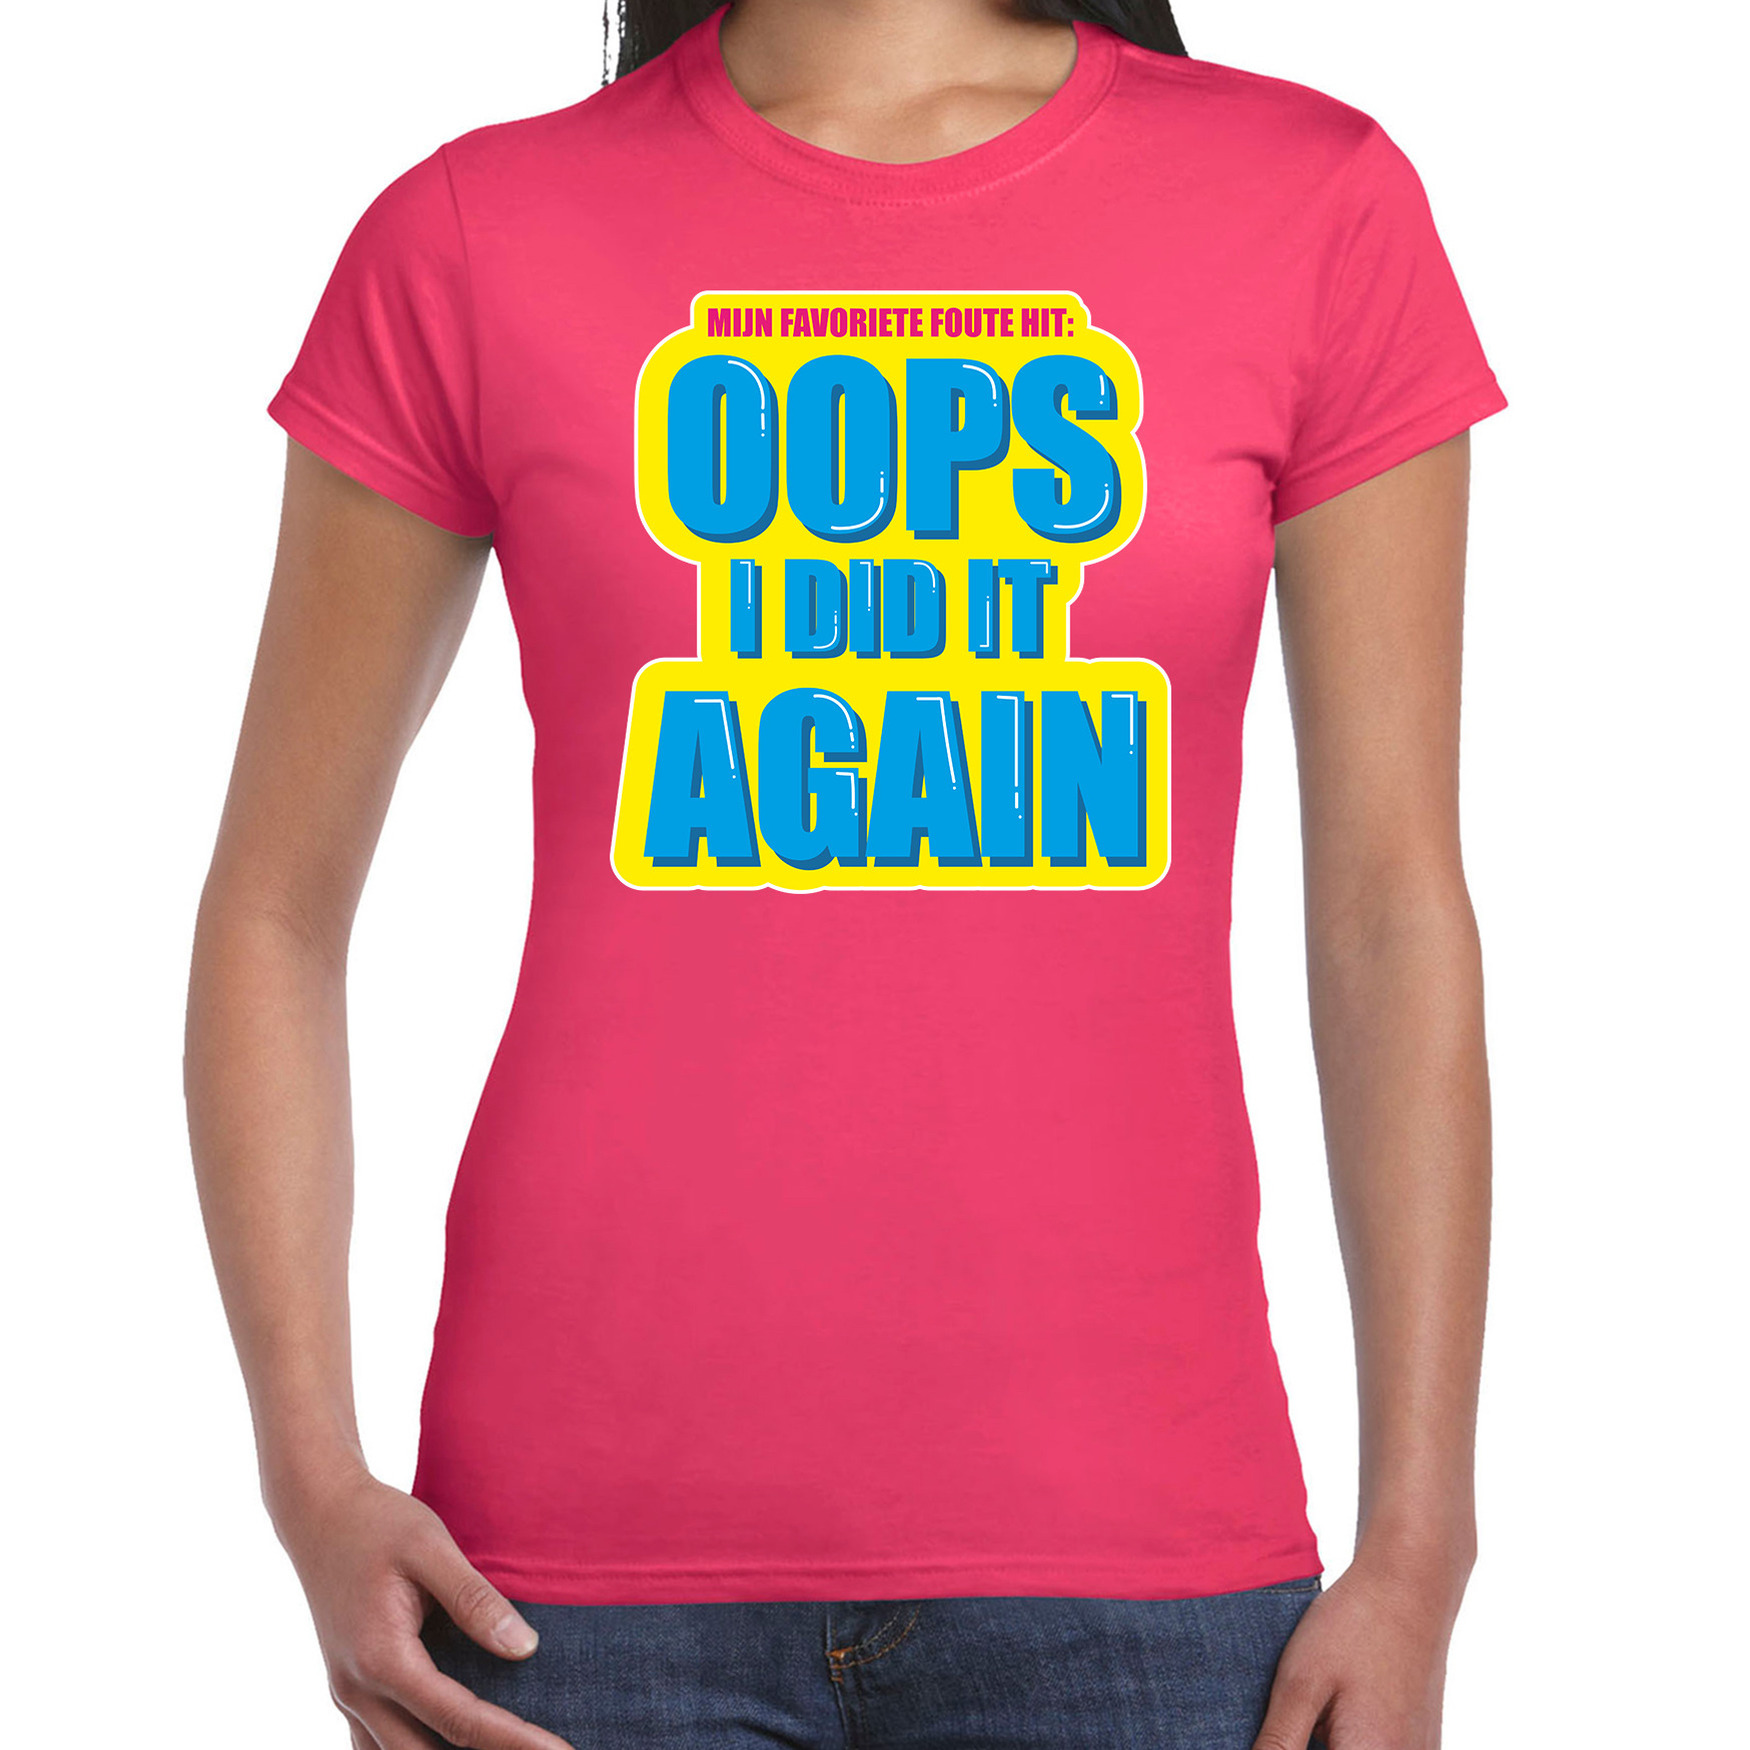 Foute party Oops I did it again verkleed t-shirt roze dames Foute party hits outfit- kleding